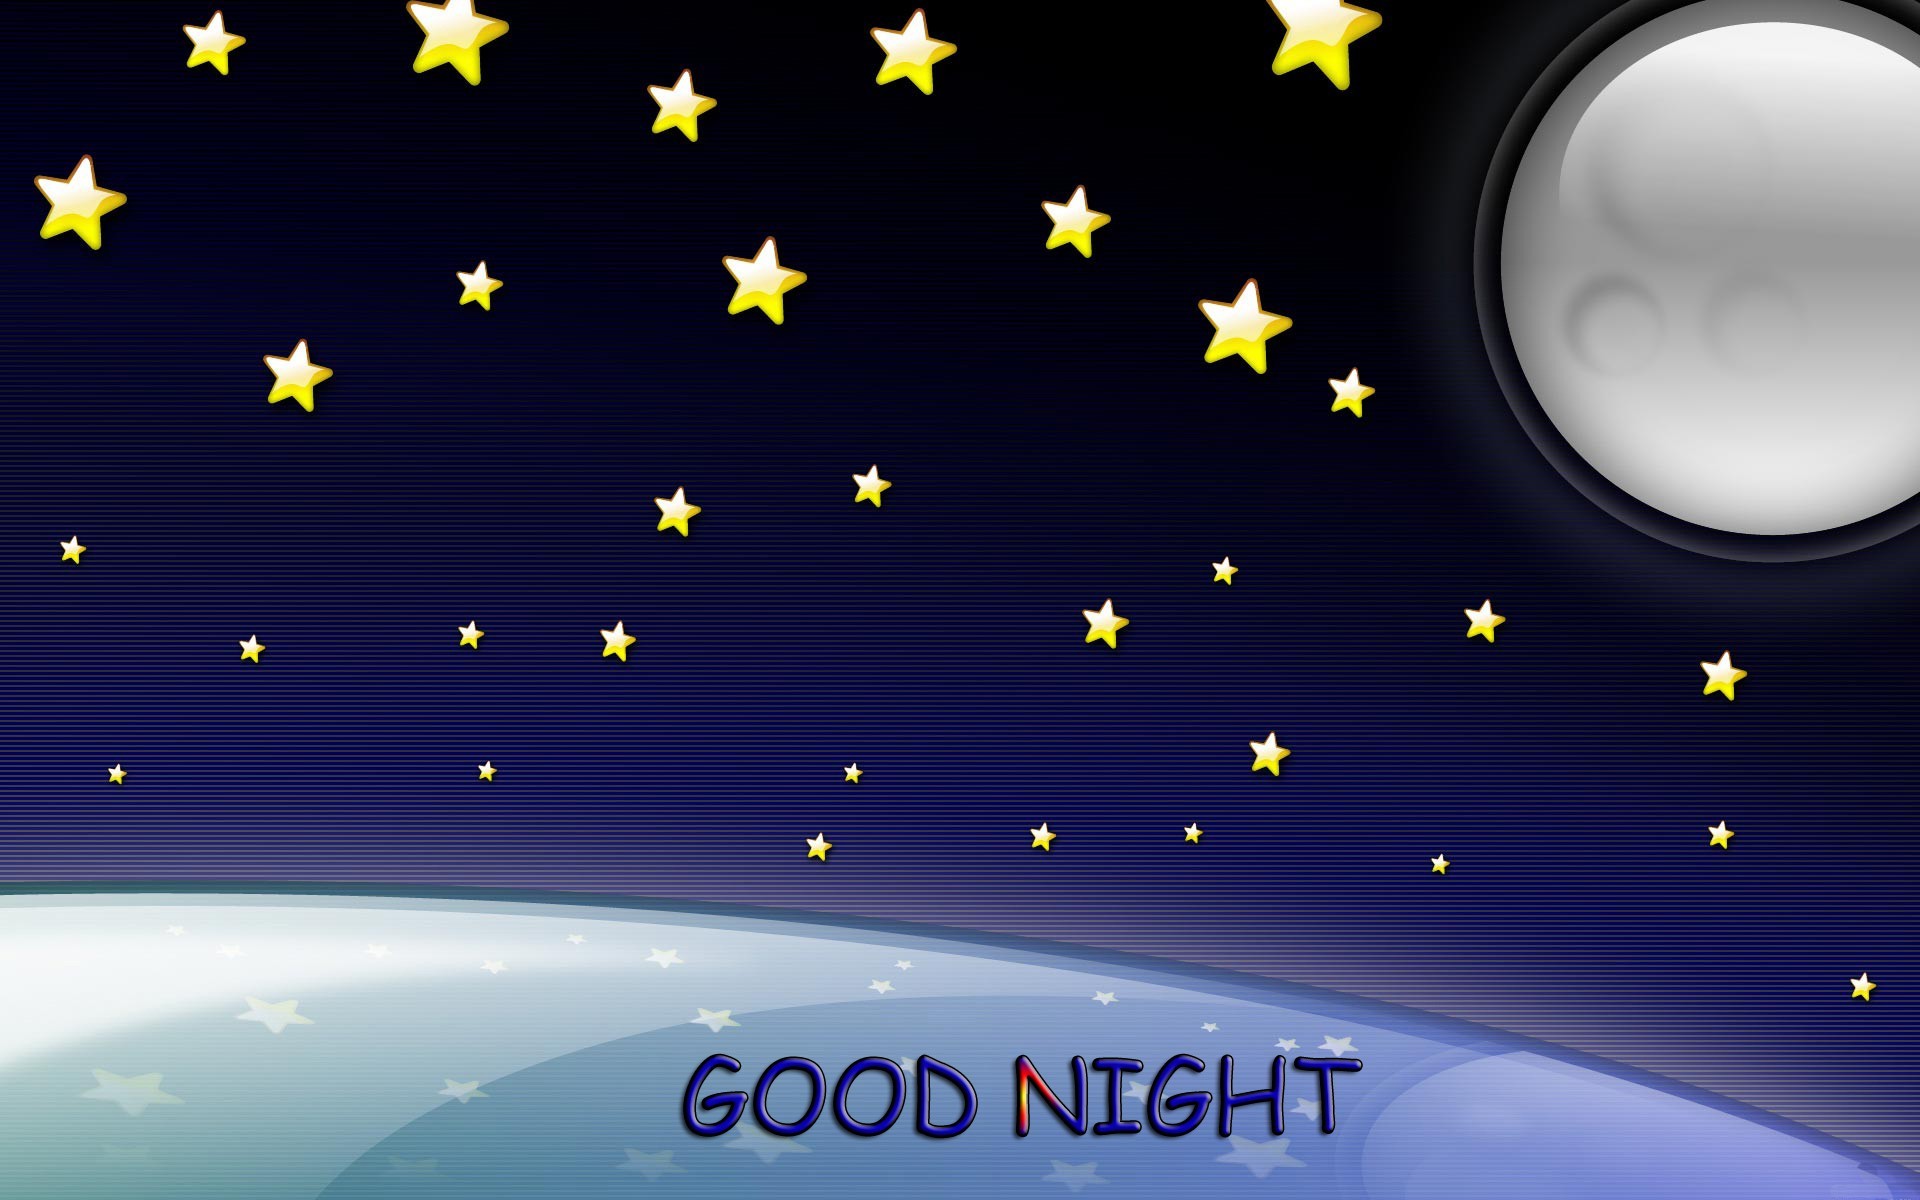 Beautiful Good Night Wallpapers HD Pictures